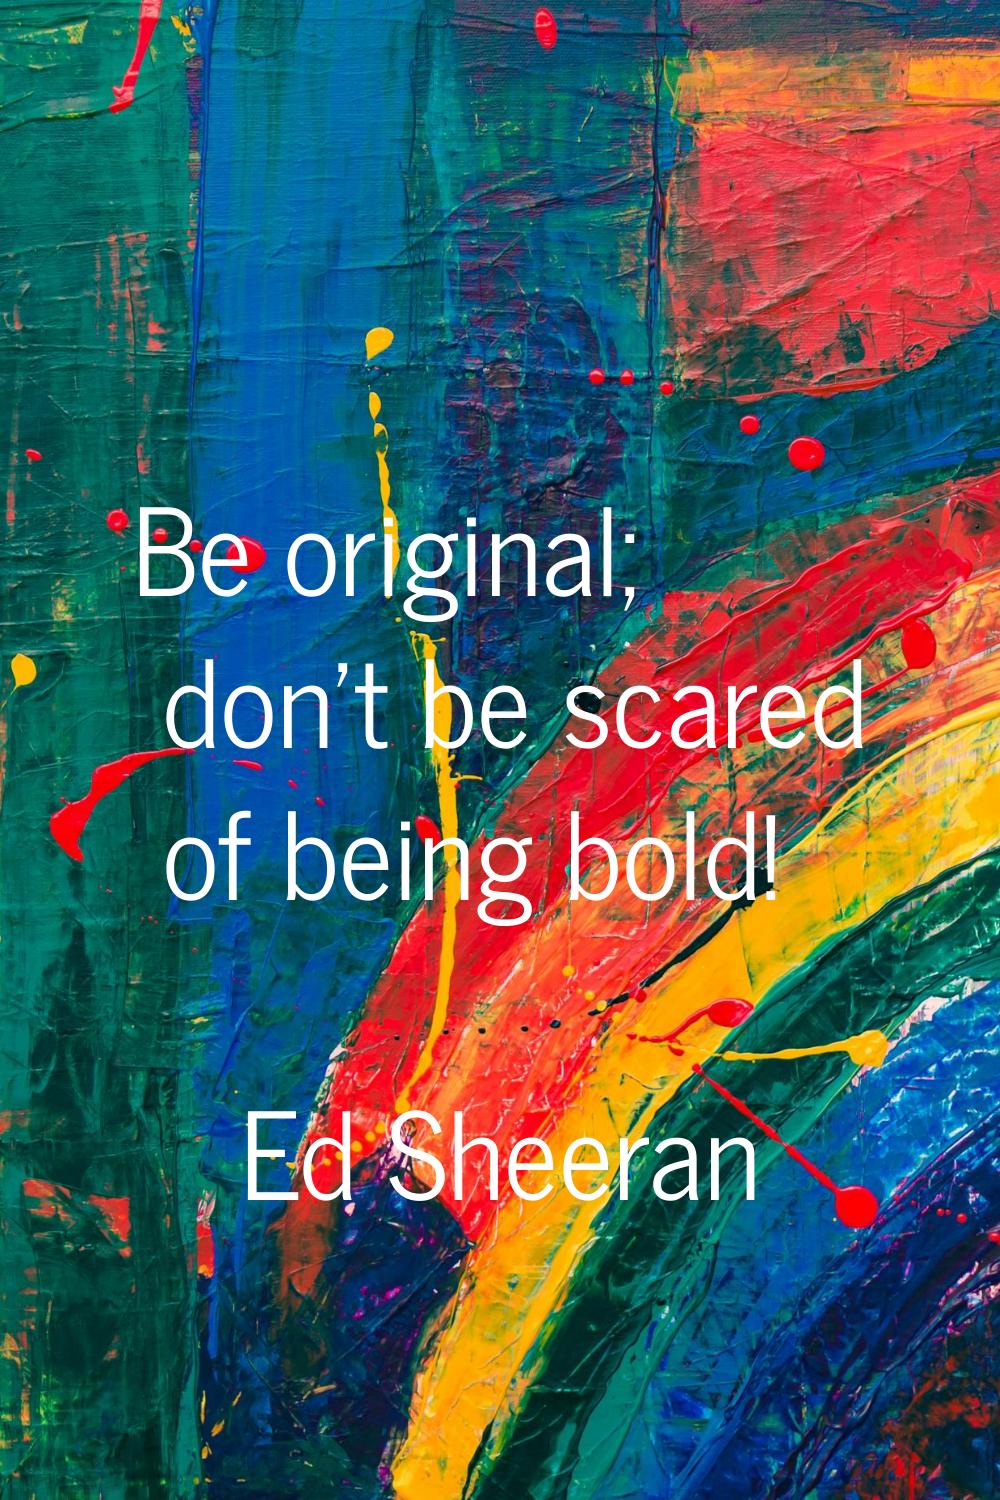 Be original; don't be scared of being bold!